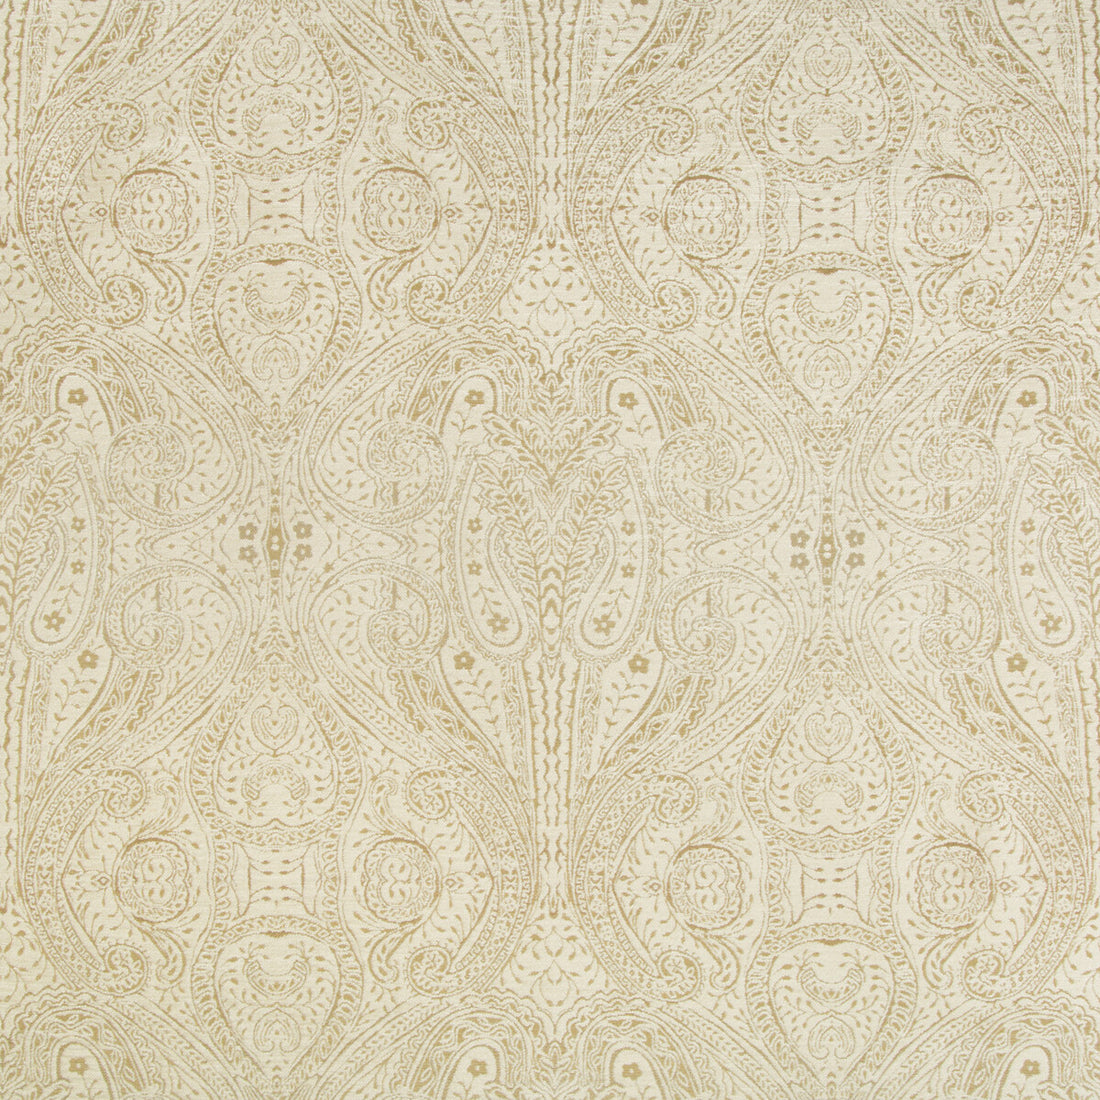 Kravet Design fabric in 35007-116 color - pattern 35007.116.0 - by Kravet Design in the Performance Crypton Home collection